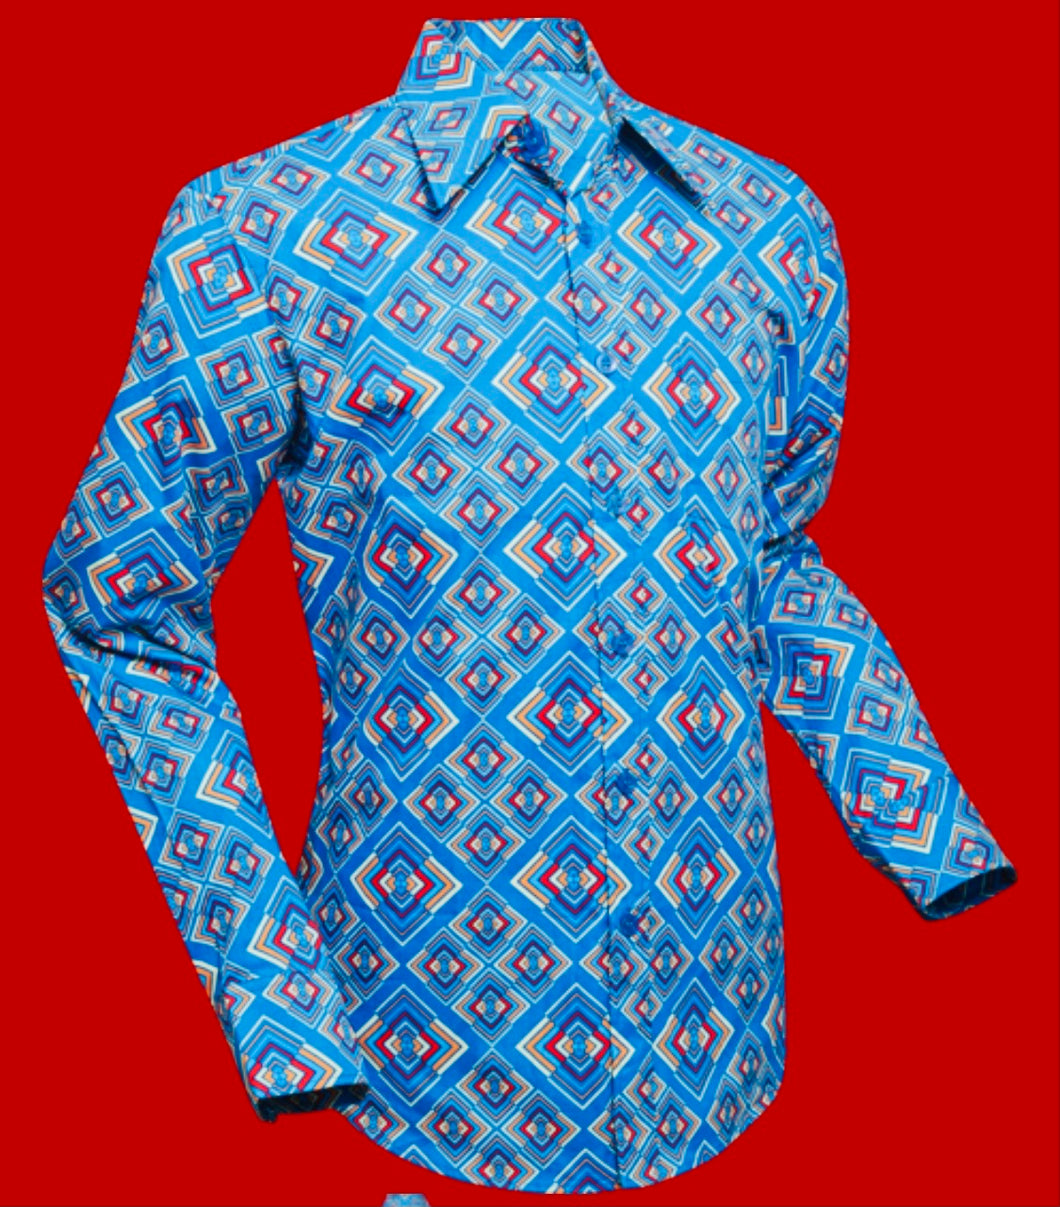 Rhombus design long sleeved Retro 70s style shirt in Turquoise